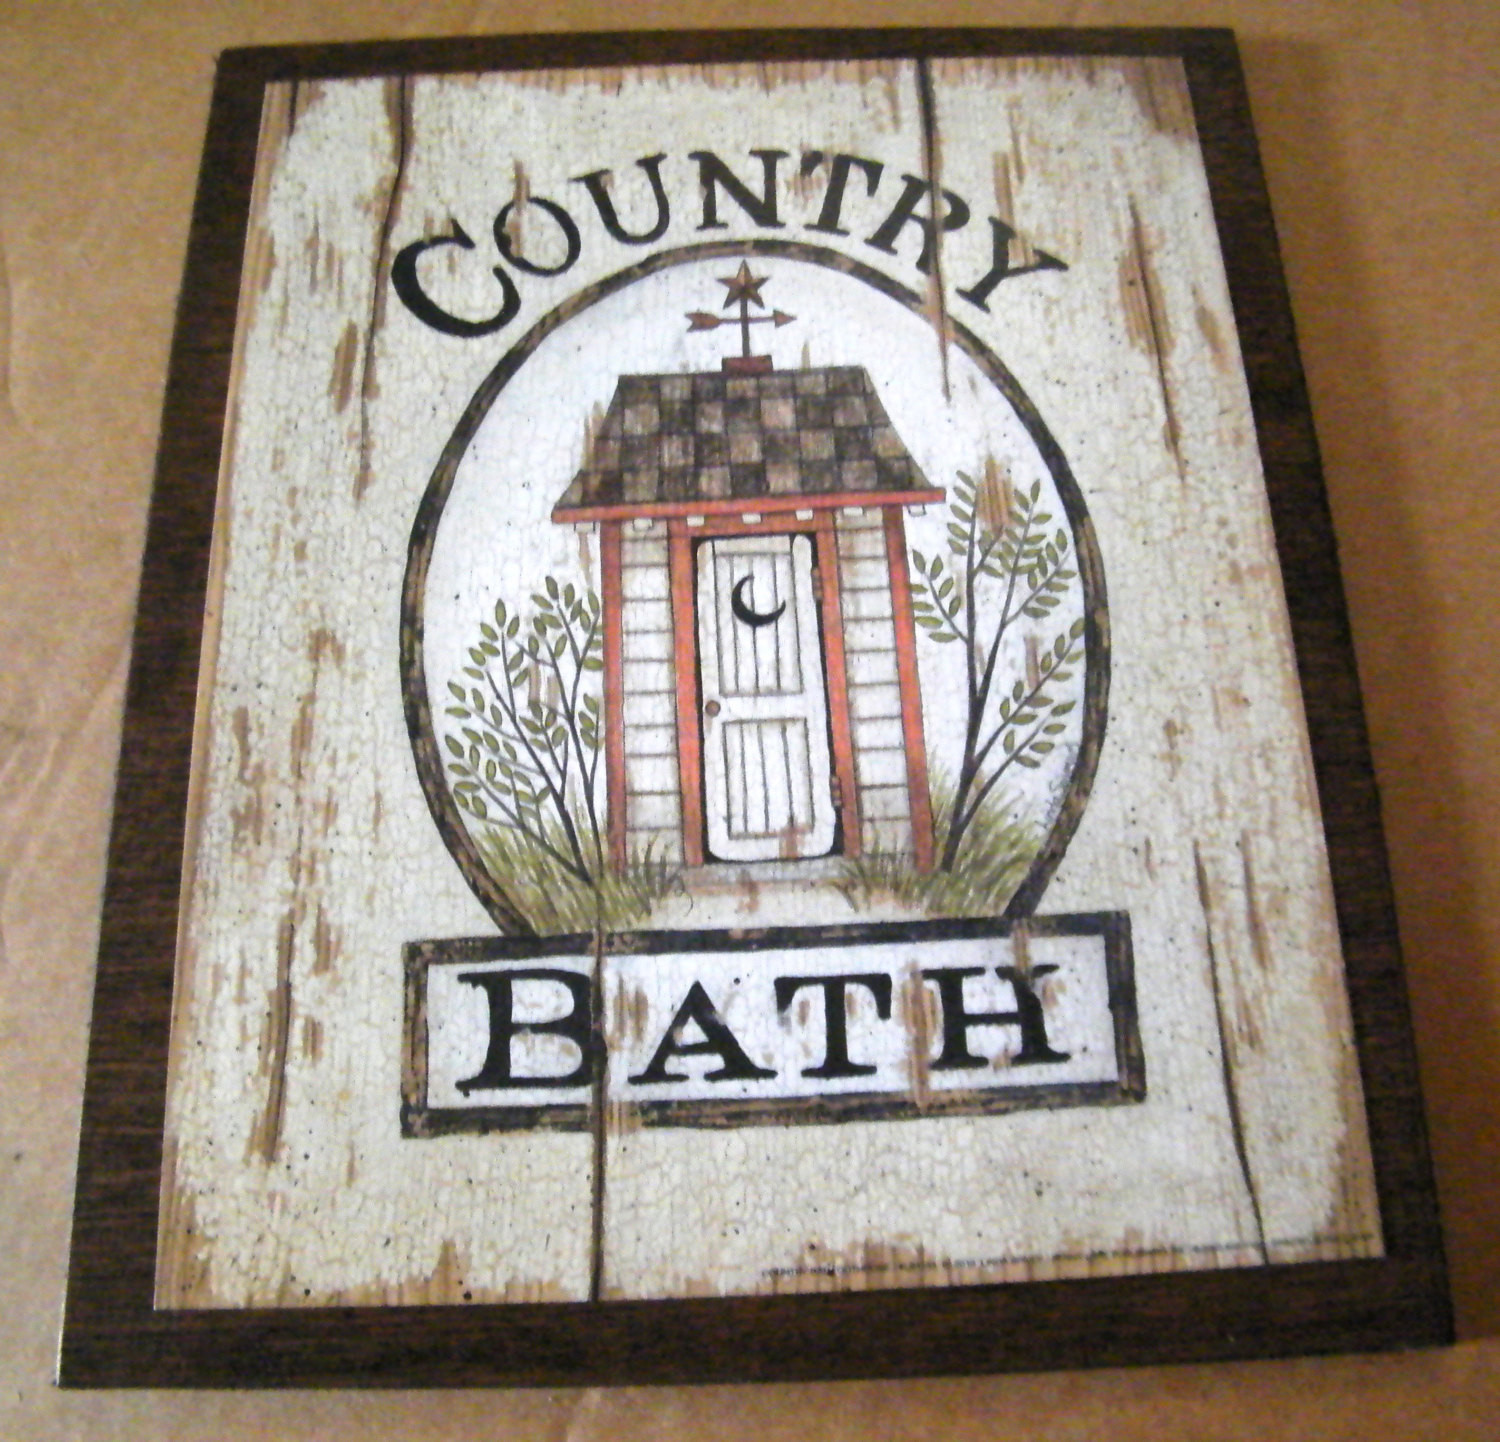 Country Bathroom Wall Decor
 OUTHOUSE Primitive Country Bath Bathroom Wall Art Decor